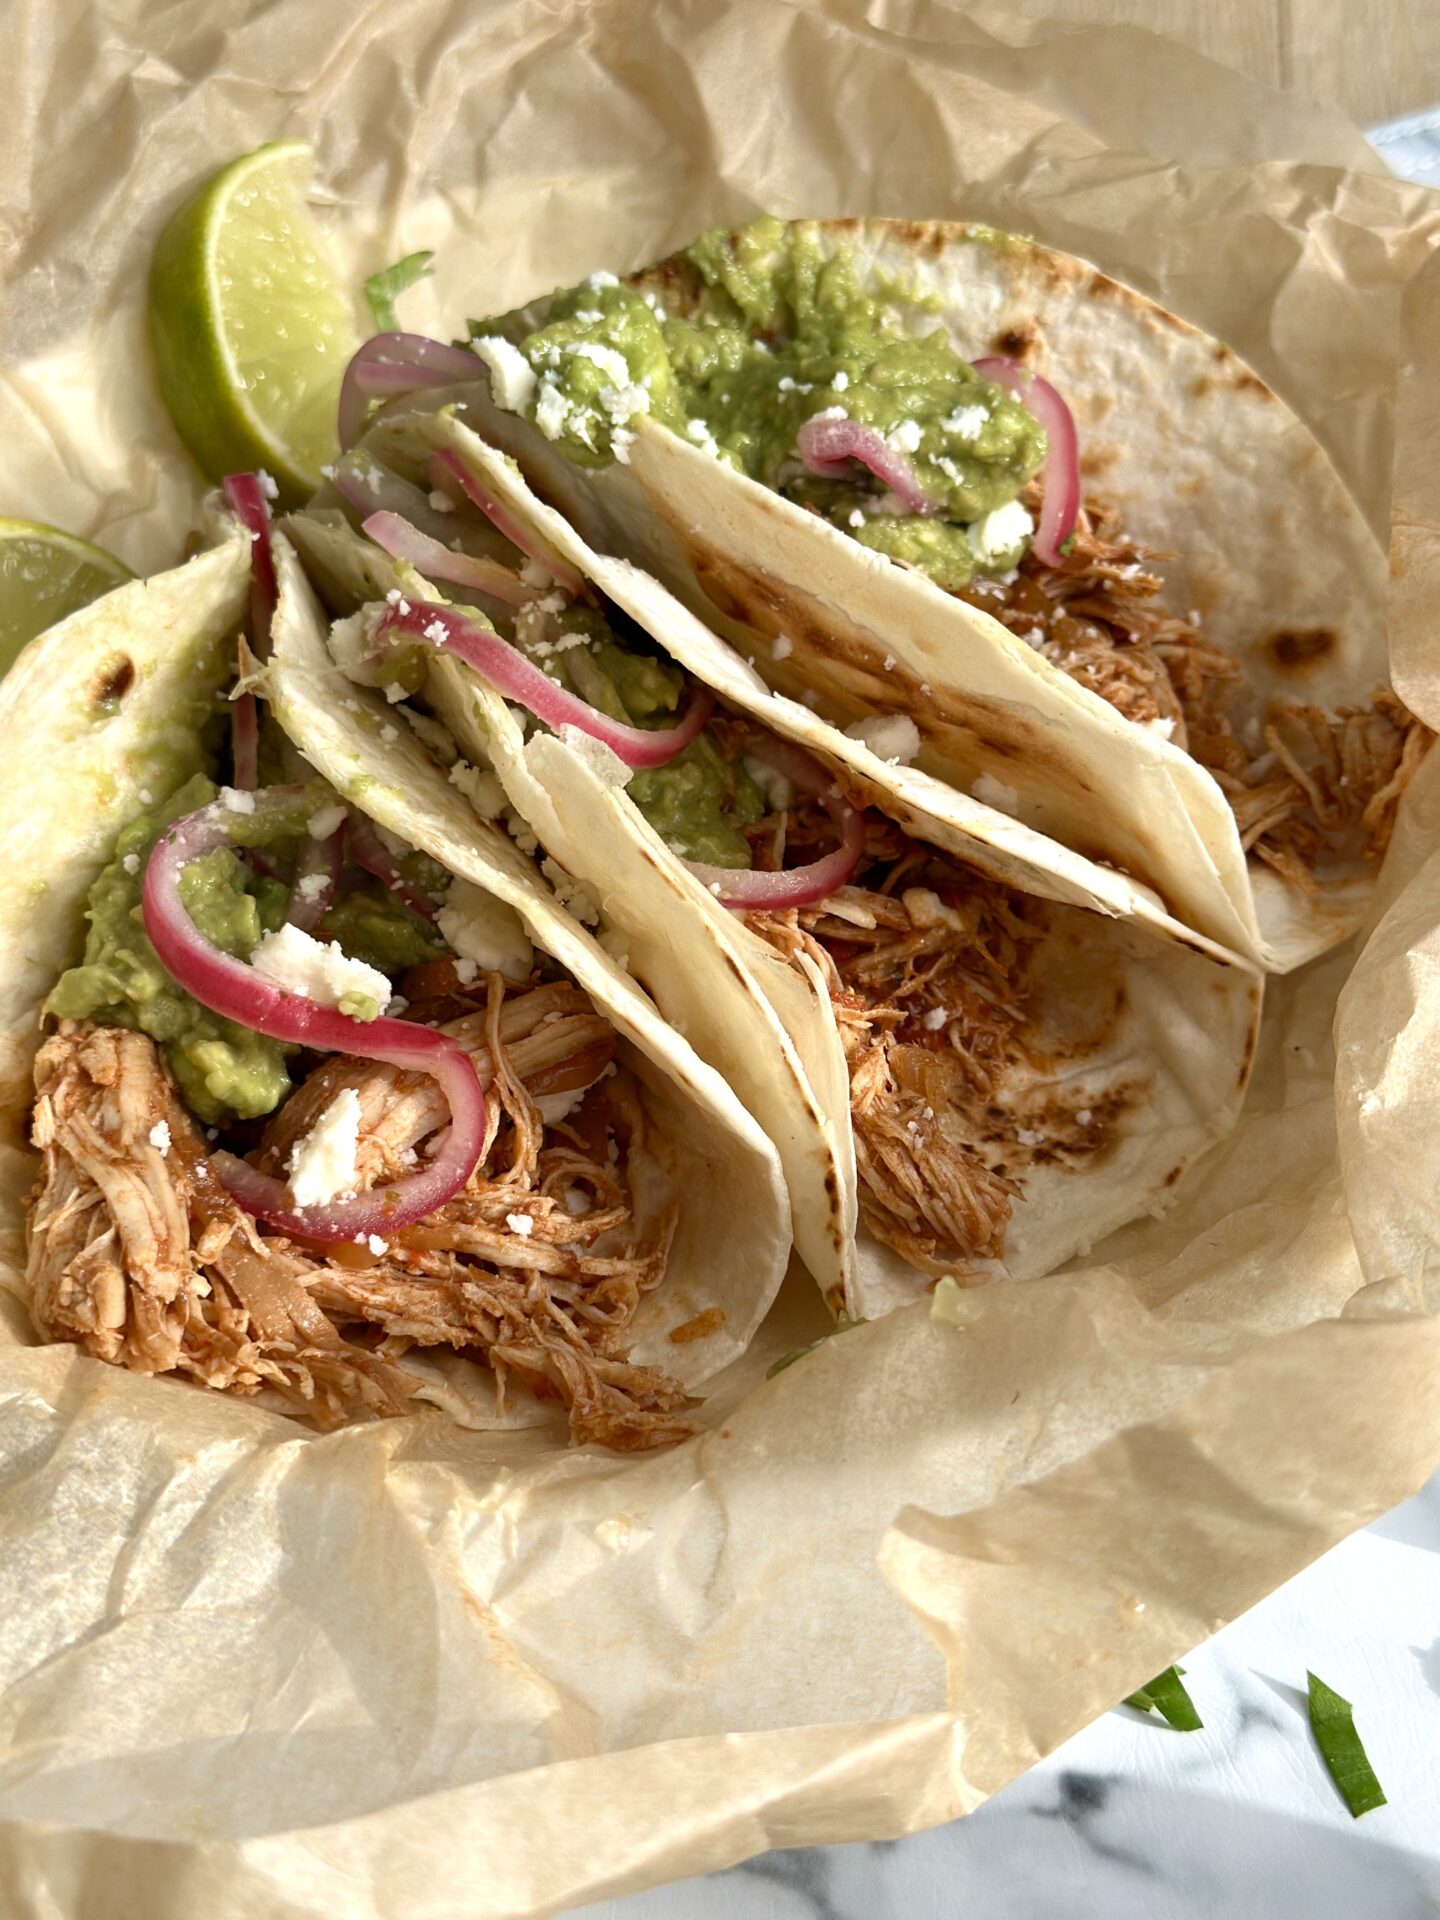 A trio of pulled chicken tacos are topped with guacamole and pickled red onions